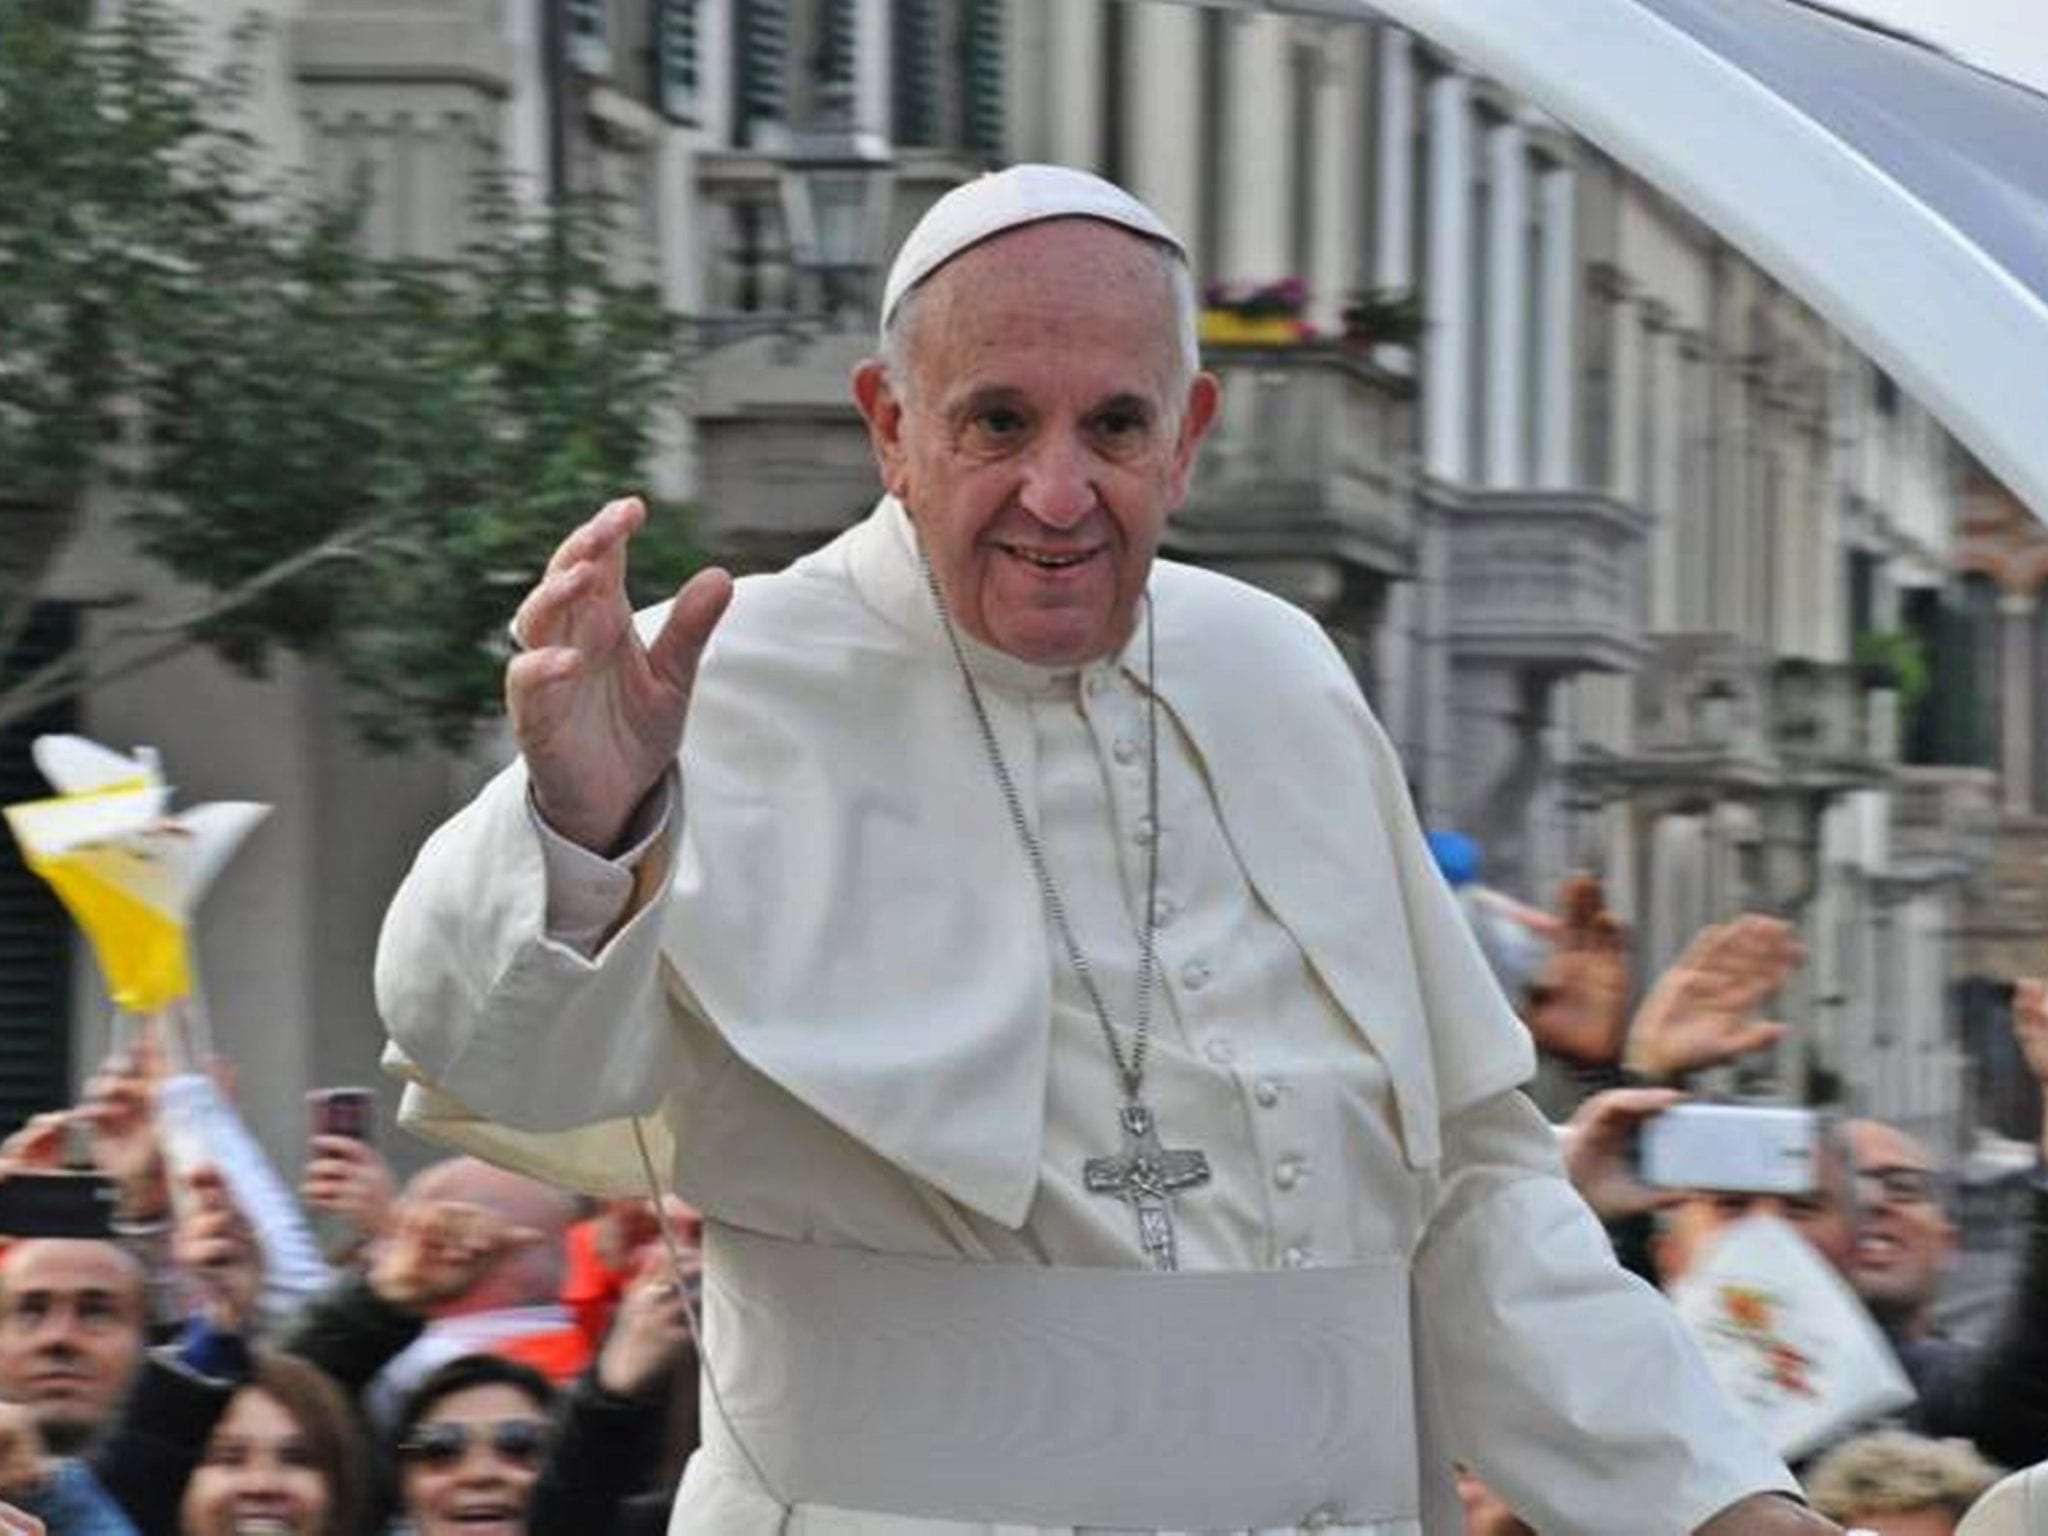 Pope Francis; image by Zebra48bo, CC BY-SA 4.0, from Wikimedia Commons, no changes.